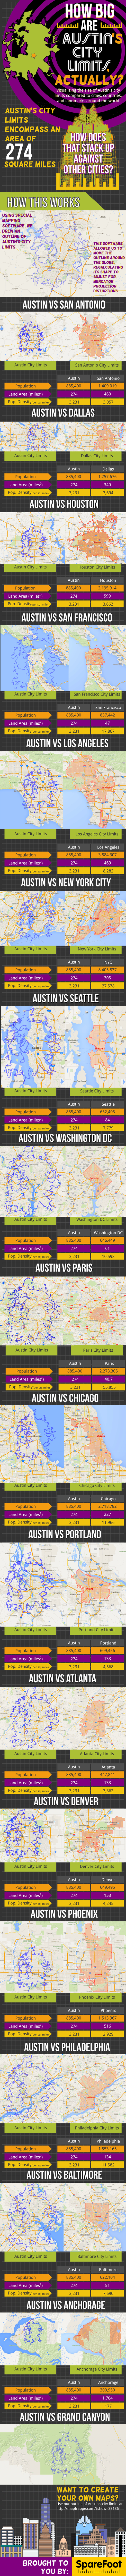 how-big-are-austins-city-limits-actually